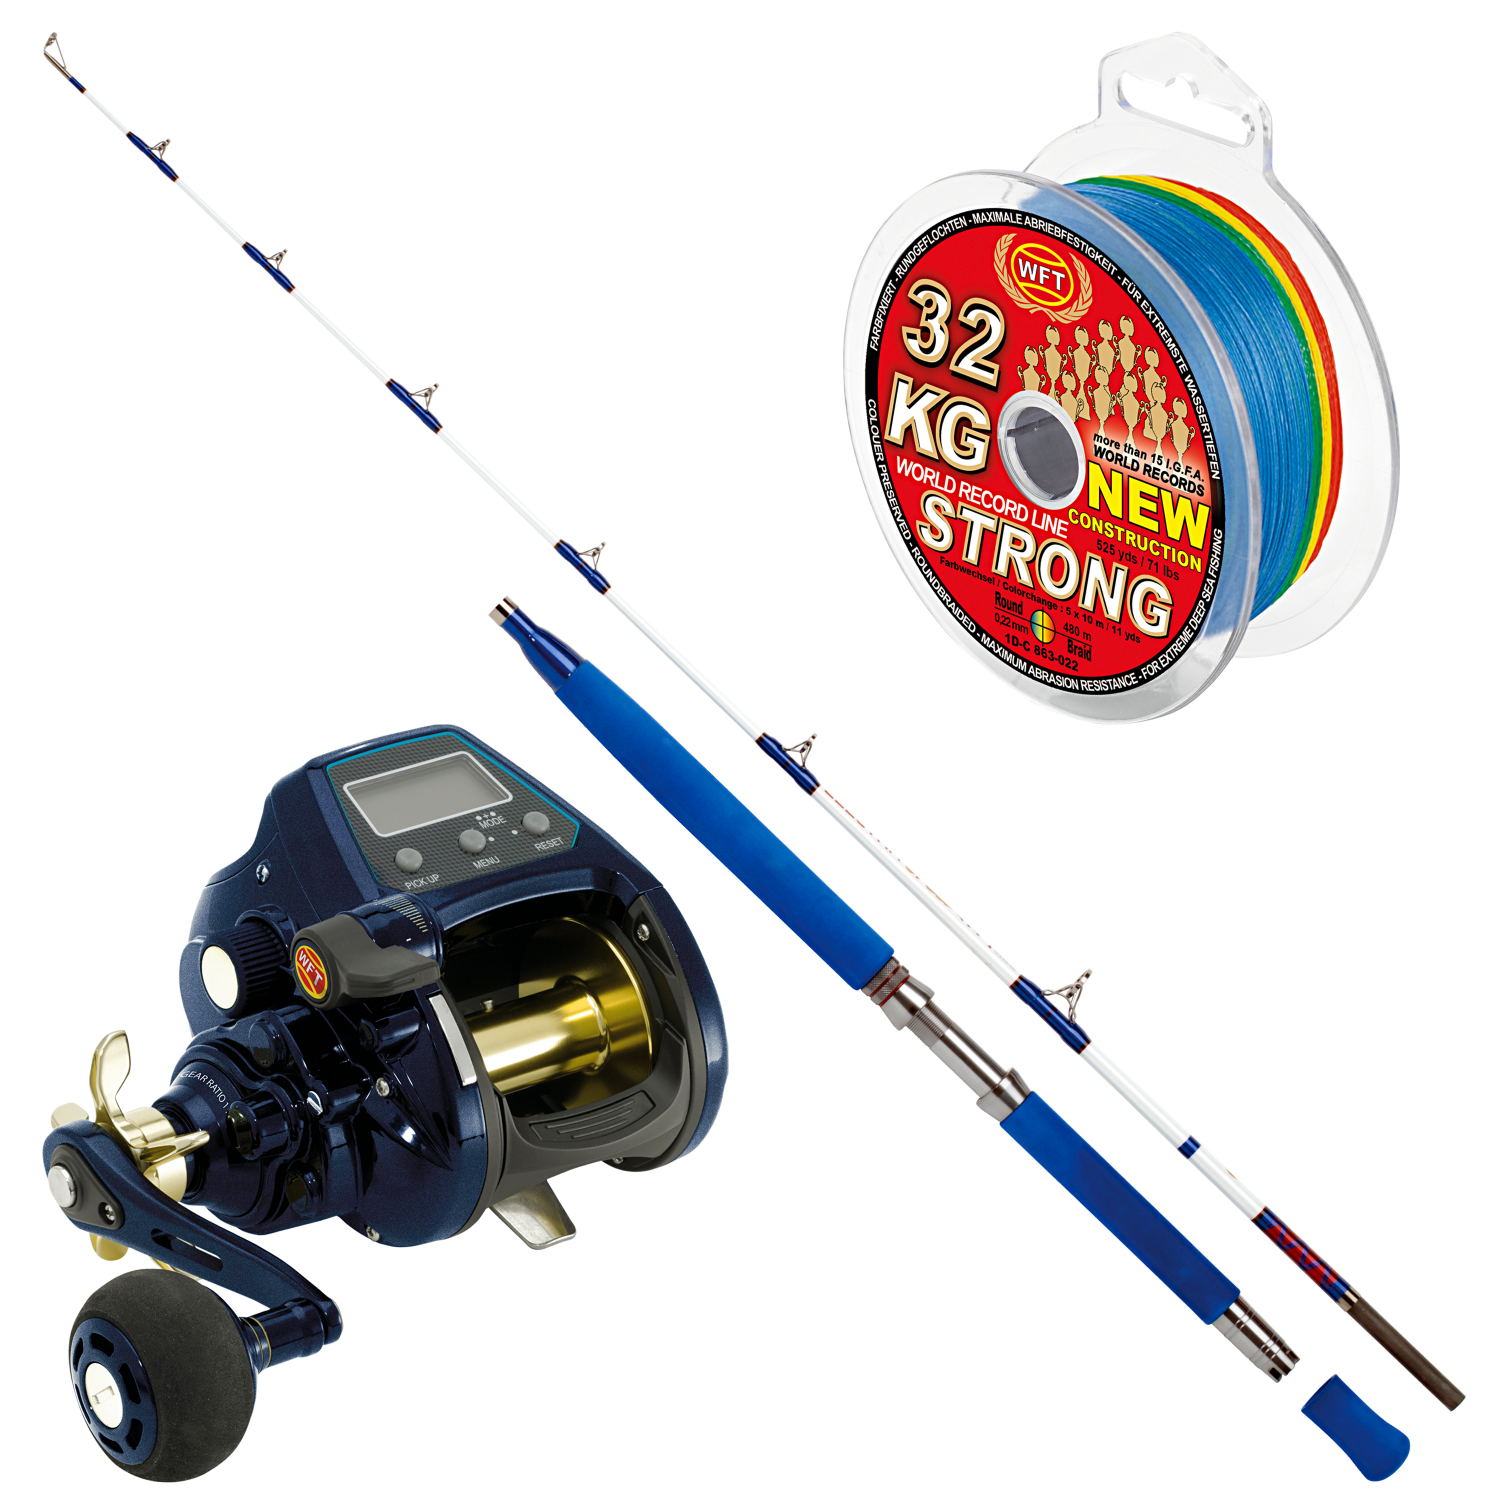 WFT Complete set (rod, reel, lines) at low prices